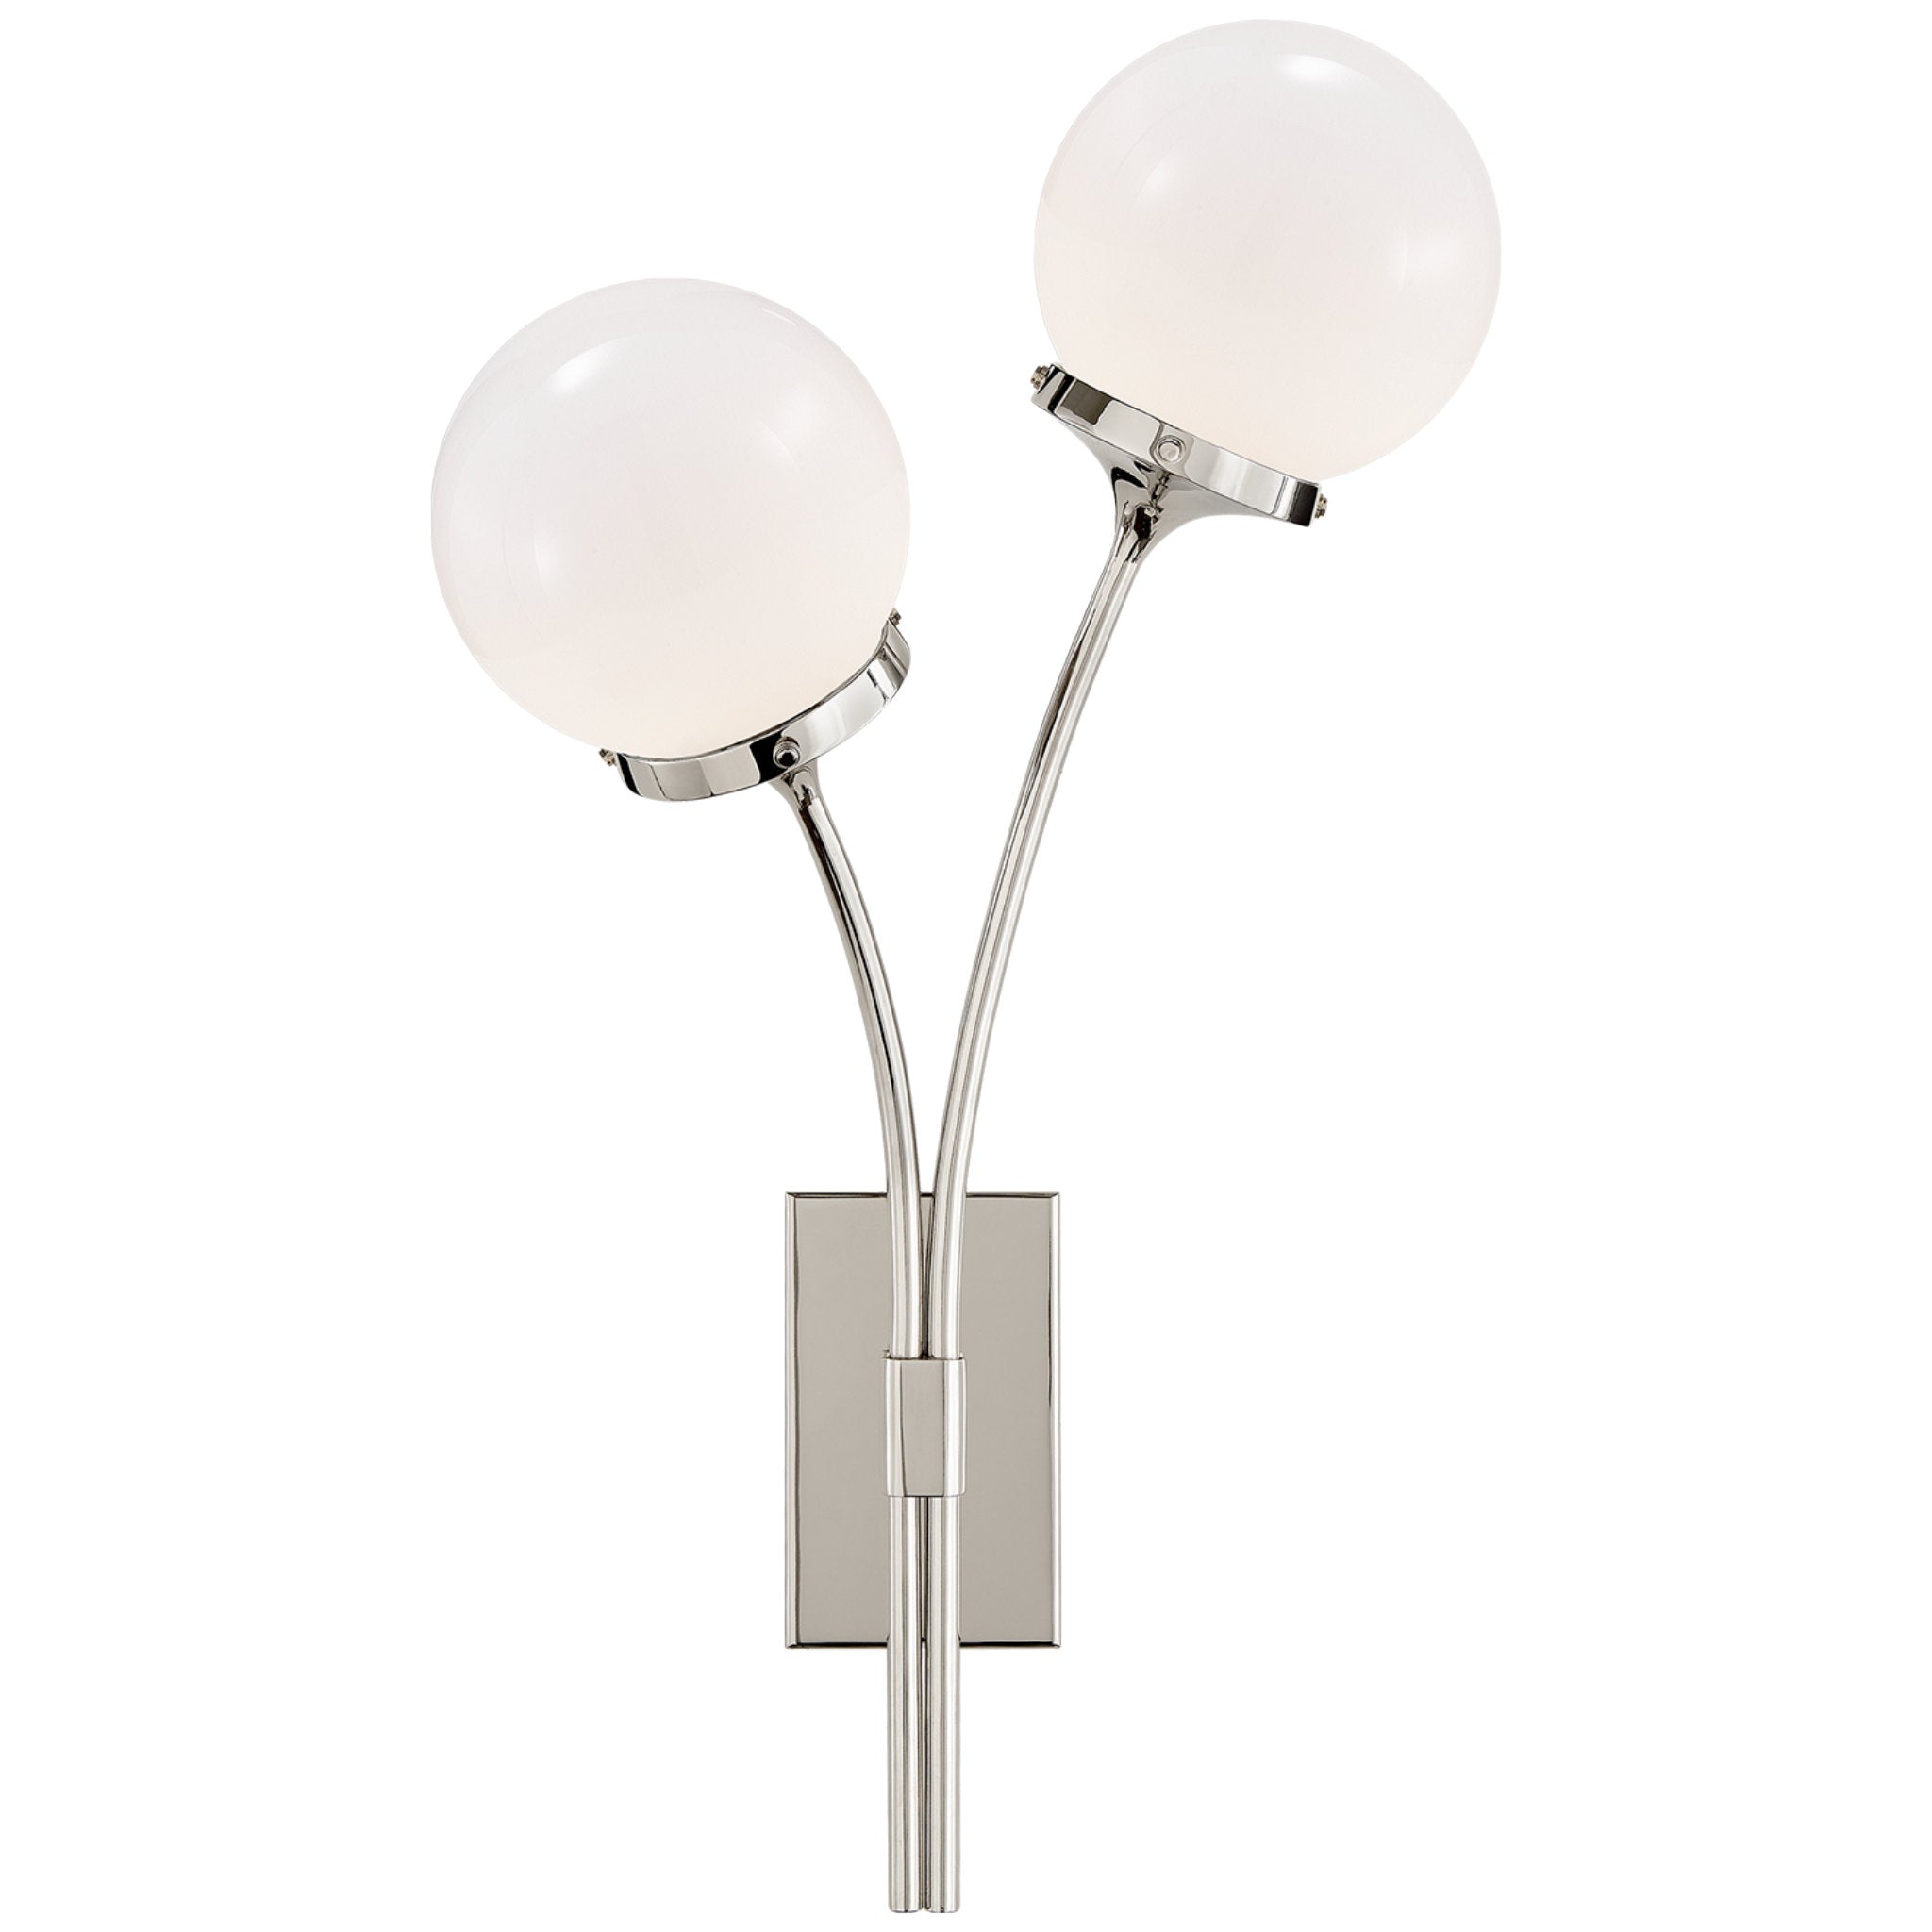 kate spade new york Prescott Left Sconce in Polished Nickel with White Glass